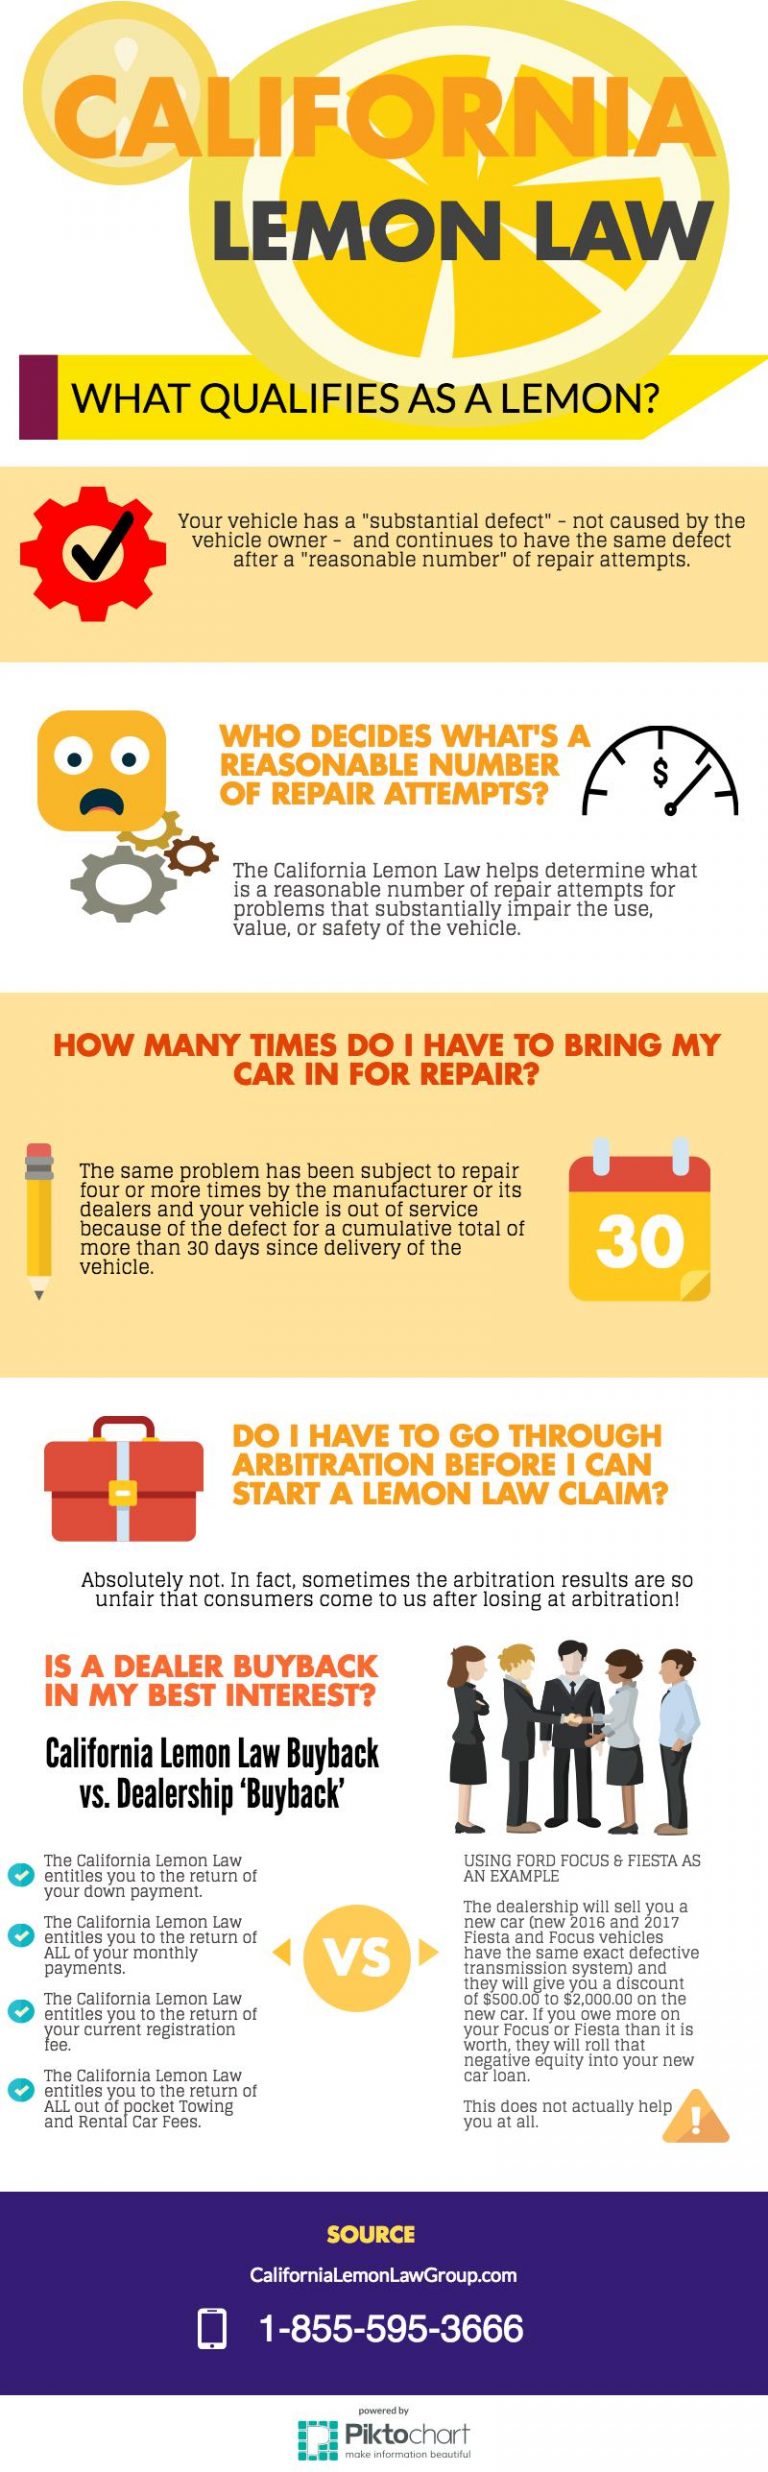 How Do You Know Your Vehicle is a Lemon? [INFOGRAPHIC]